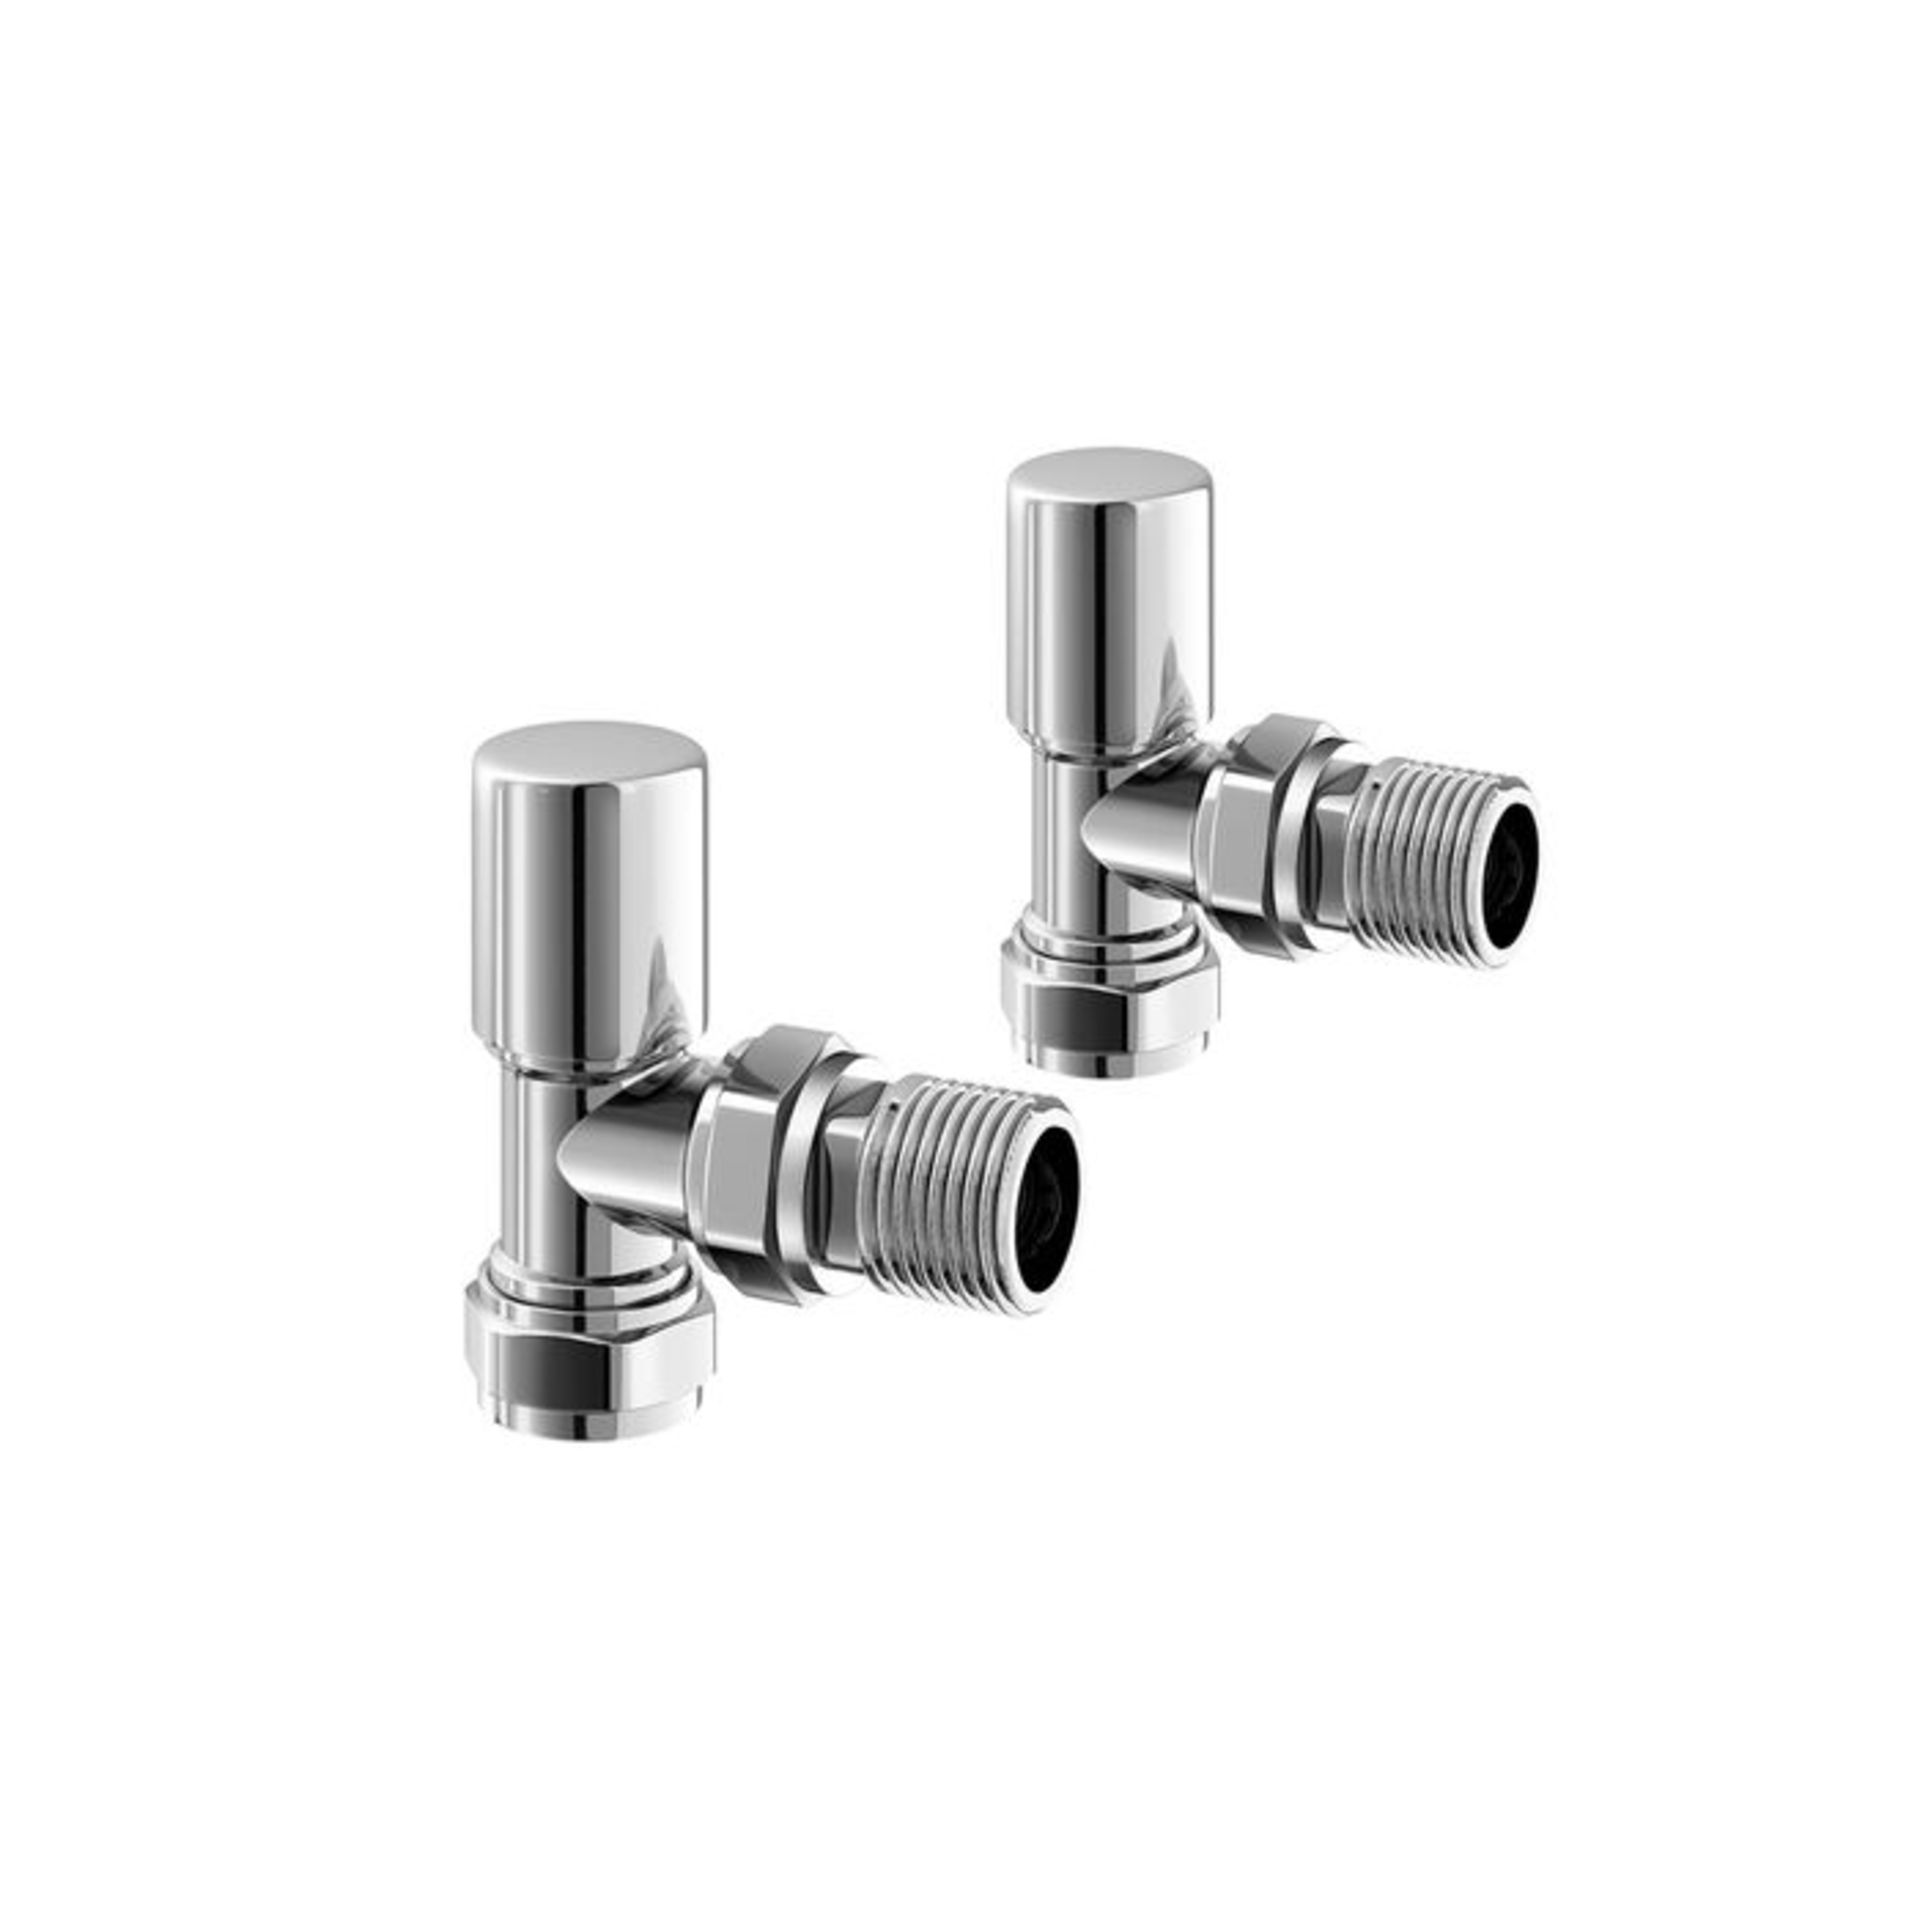 (SU1047) Standard 15mm Connection Angled Chrome Radiator Valves Chrome Plated Solid Brass Ang...